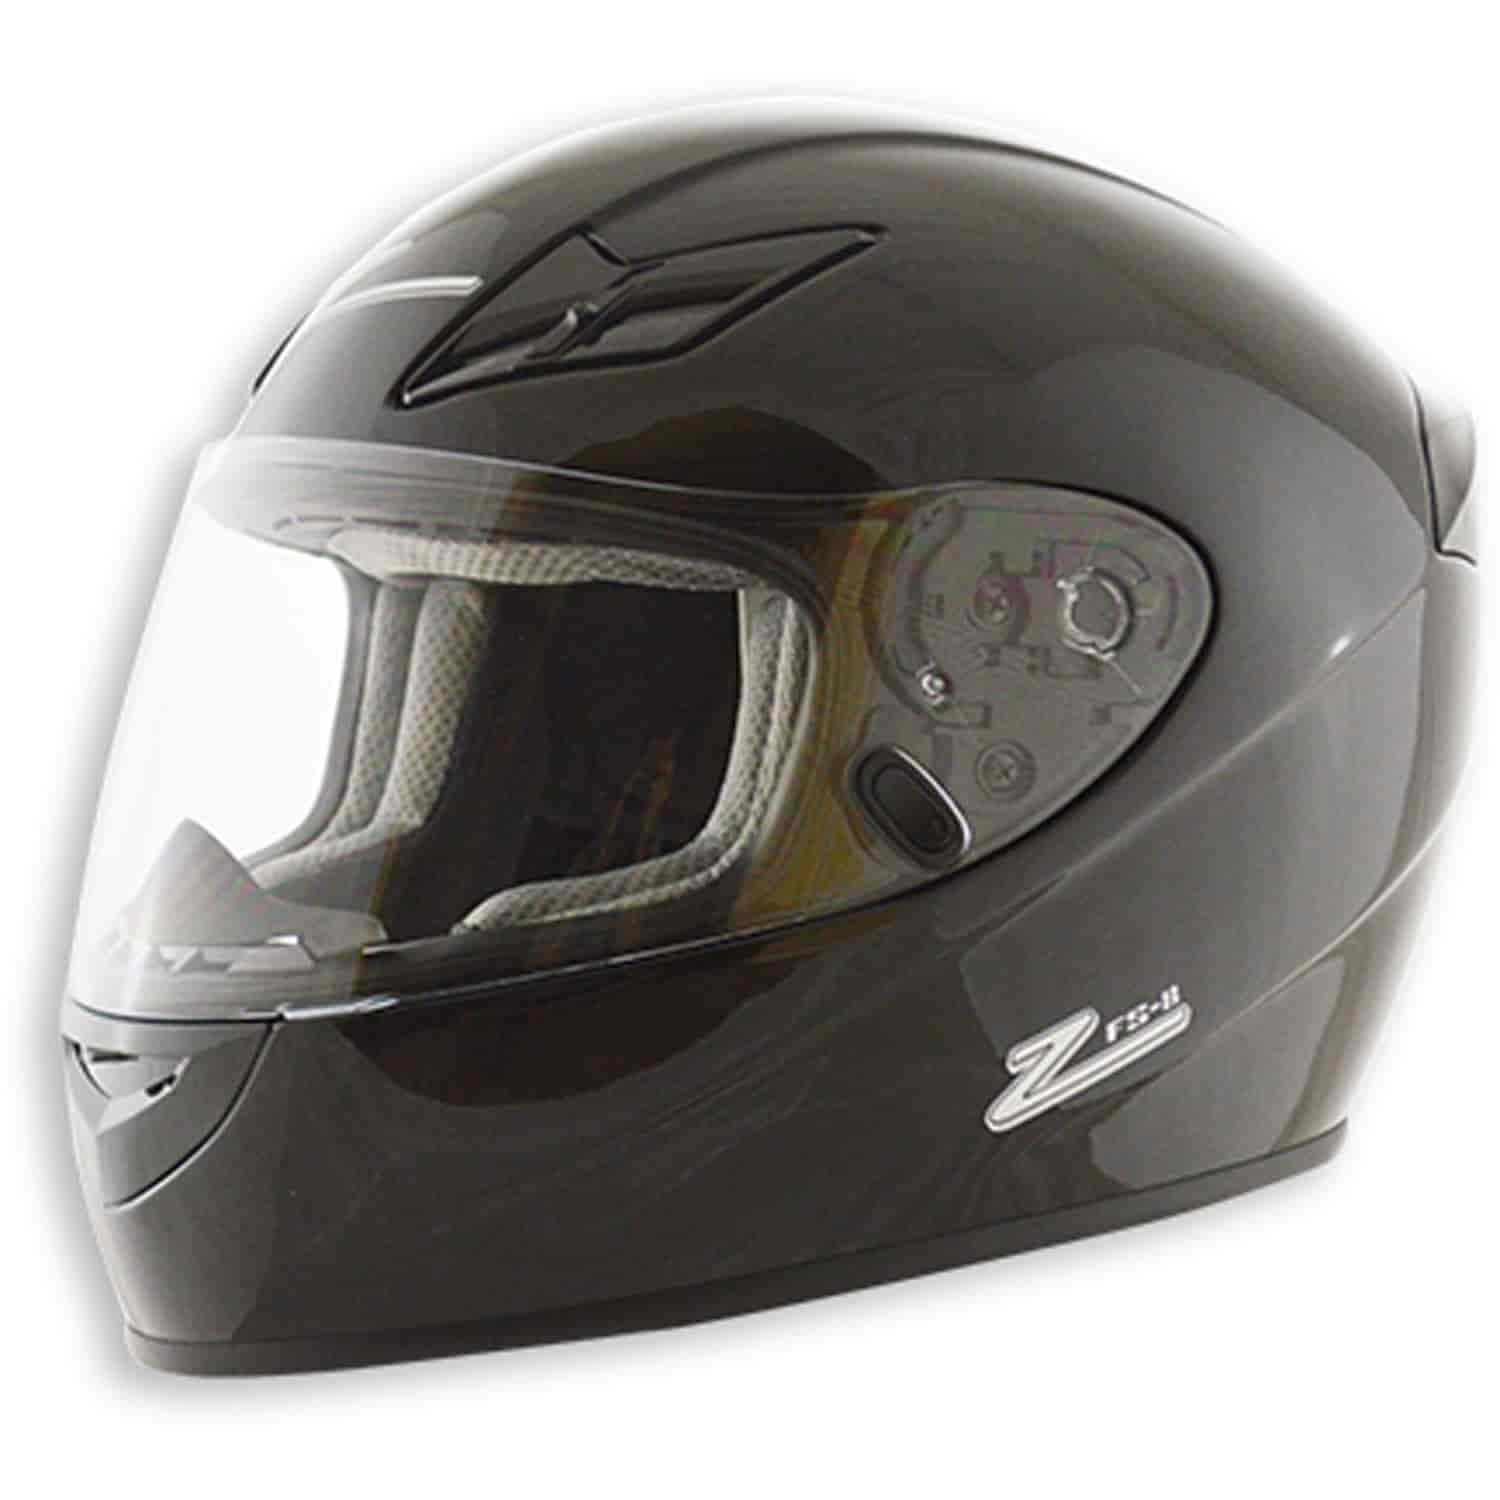 FS-8 Motorcycle Helmet M2015 and DOT Certified